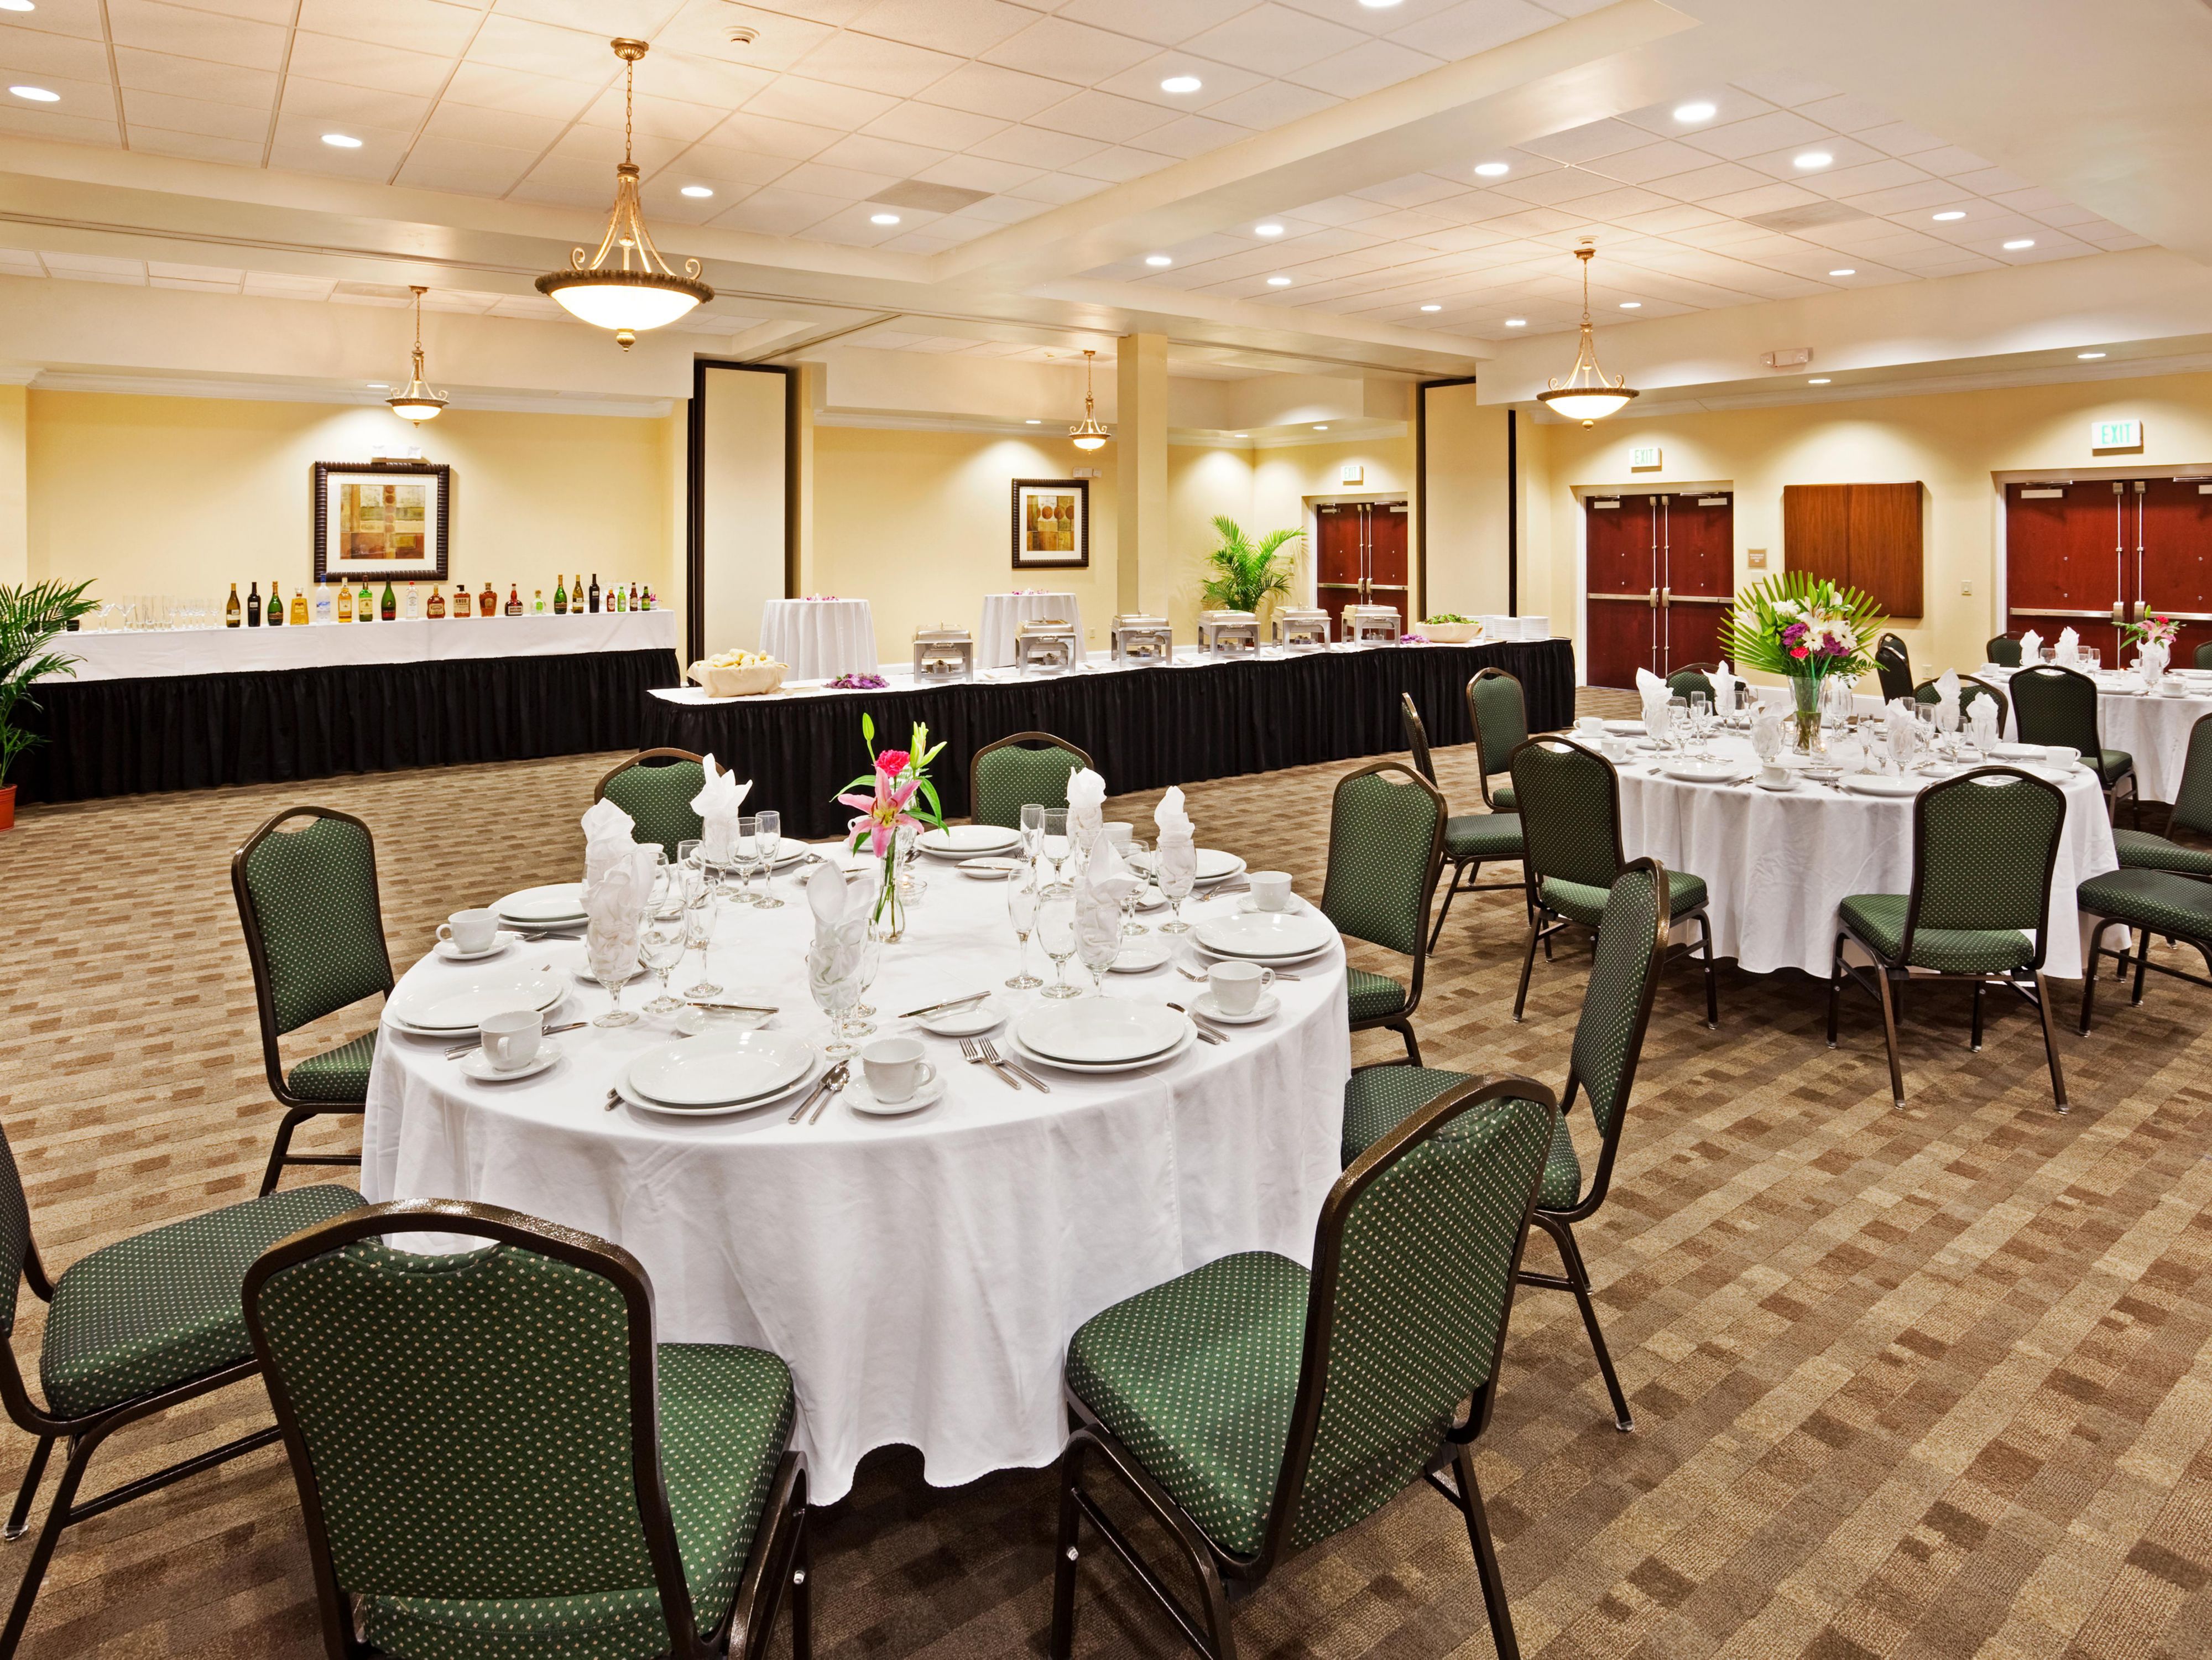 The Holiday Inn & Suites Beaufort features over 5,000 square feet of flexible event space and full service catering to accommodate a full range of guest list sizes. Gather your family and friends at the Holiday Inn & Suites Beaufort for a wedding day you’ll never forget.